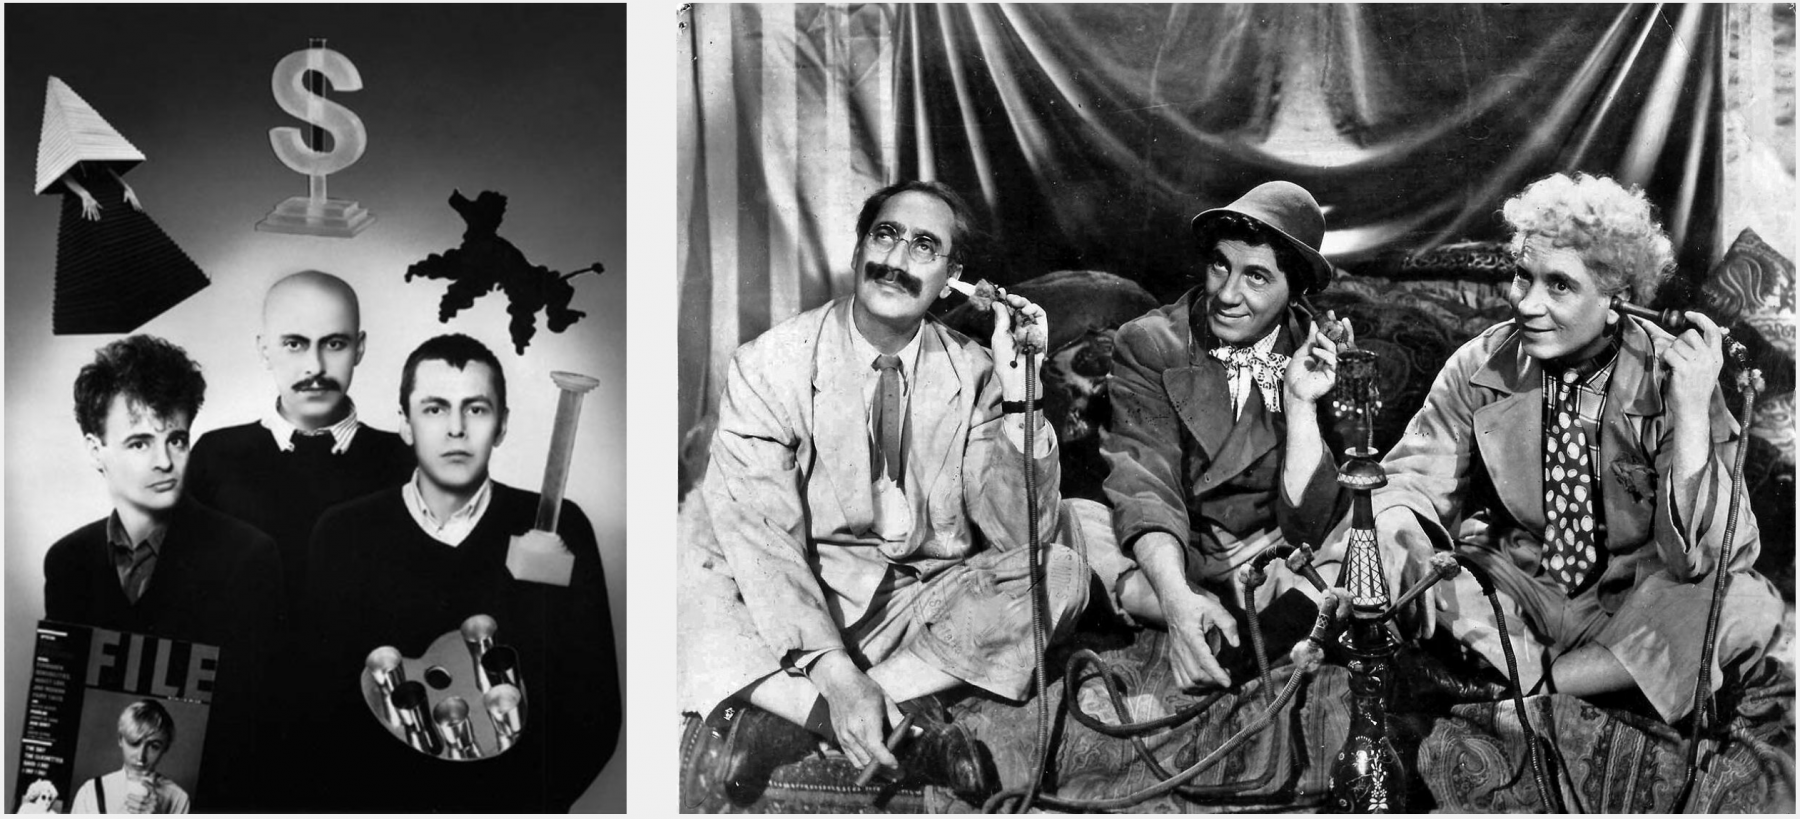 Left: GENERAL IDEA, Self-portrait with Objects (1982)

Right: Publicity photo of the Marx Brothers in 1946 (Creative Commons)